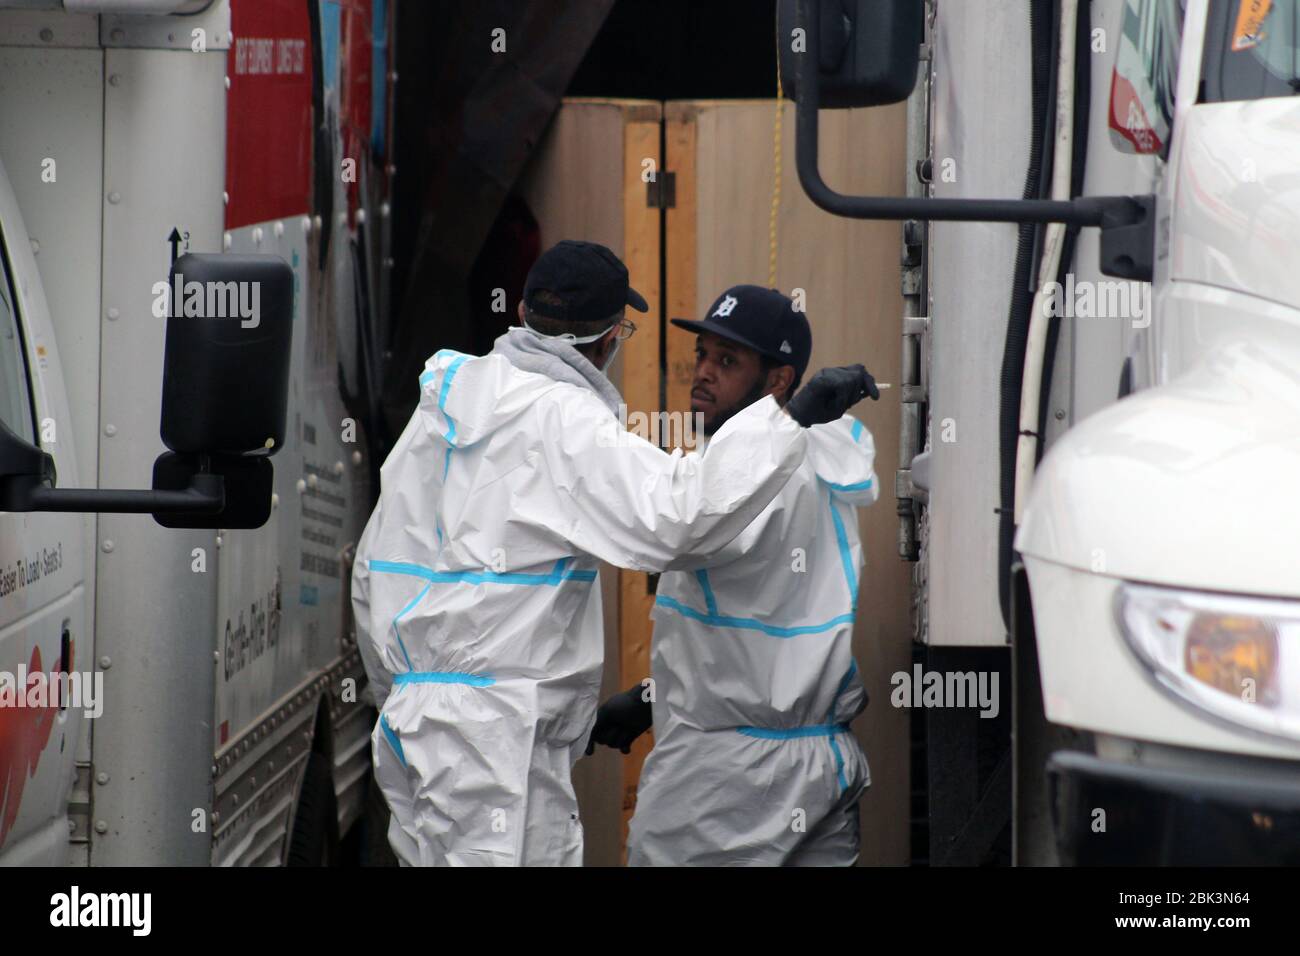 New York, New York, USA. 30th Apr, 2020. This 2 men, dressed in a hazmat, stop between two trucks in front of the Andrew T. Cleckley Funeral Home in Brooklyn where bodies non properly cared are removed. 60 corpses were stored in 4 non-refregerated rented trucks lining the street nearby stores. Neighbors reported a foul smell still persistent and fluids dripping from the trucks. Some remains were also found lying on the facilityÃ¢â‚¬â„¢s floor. The funeral home was overwhelmed by COVID-19 deaths, waiting for weeks for cremations. Credit: Marie Le Ble/ZUMA Wire/Alamy Live News Stock Photo